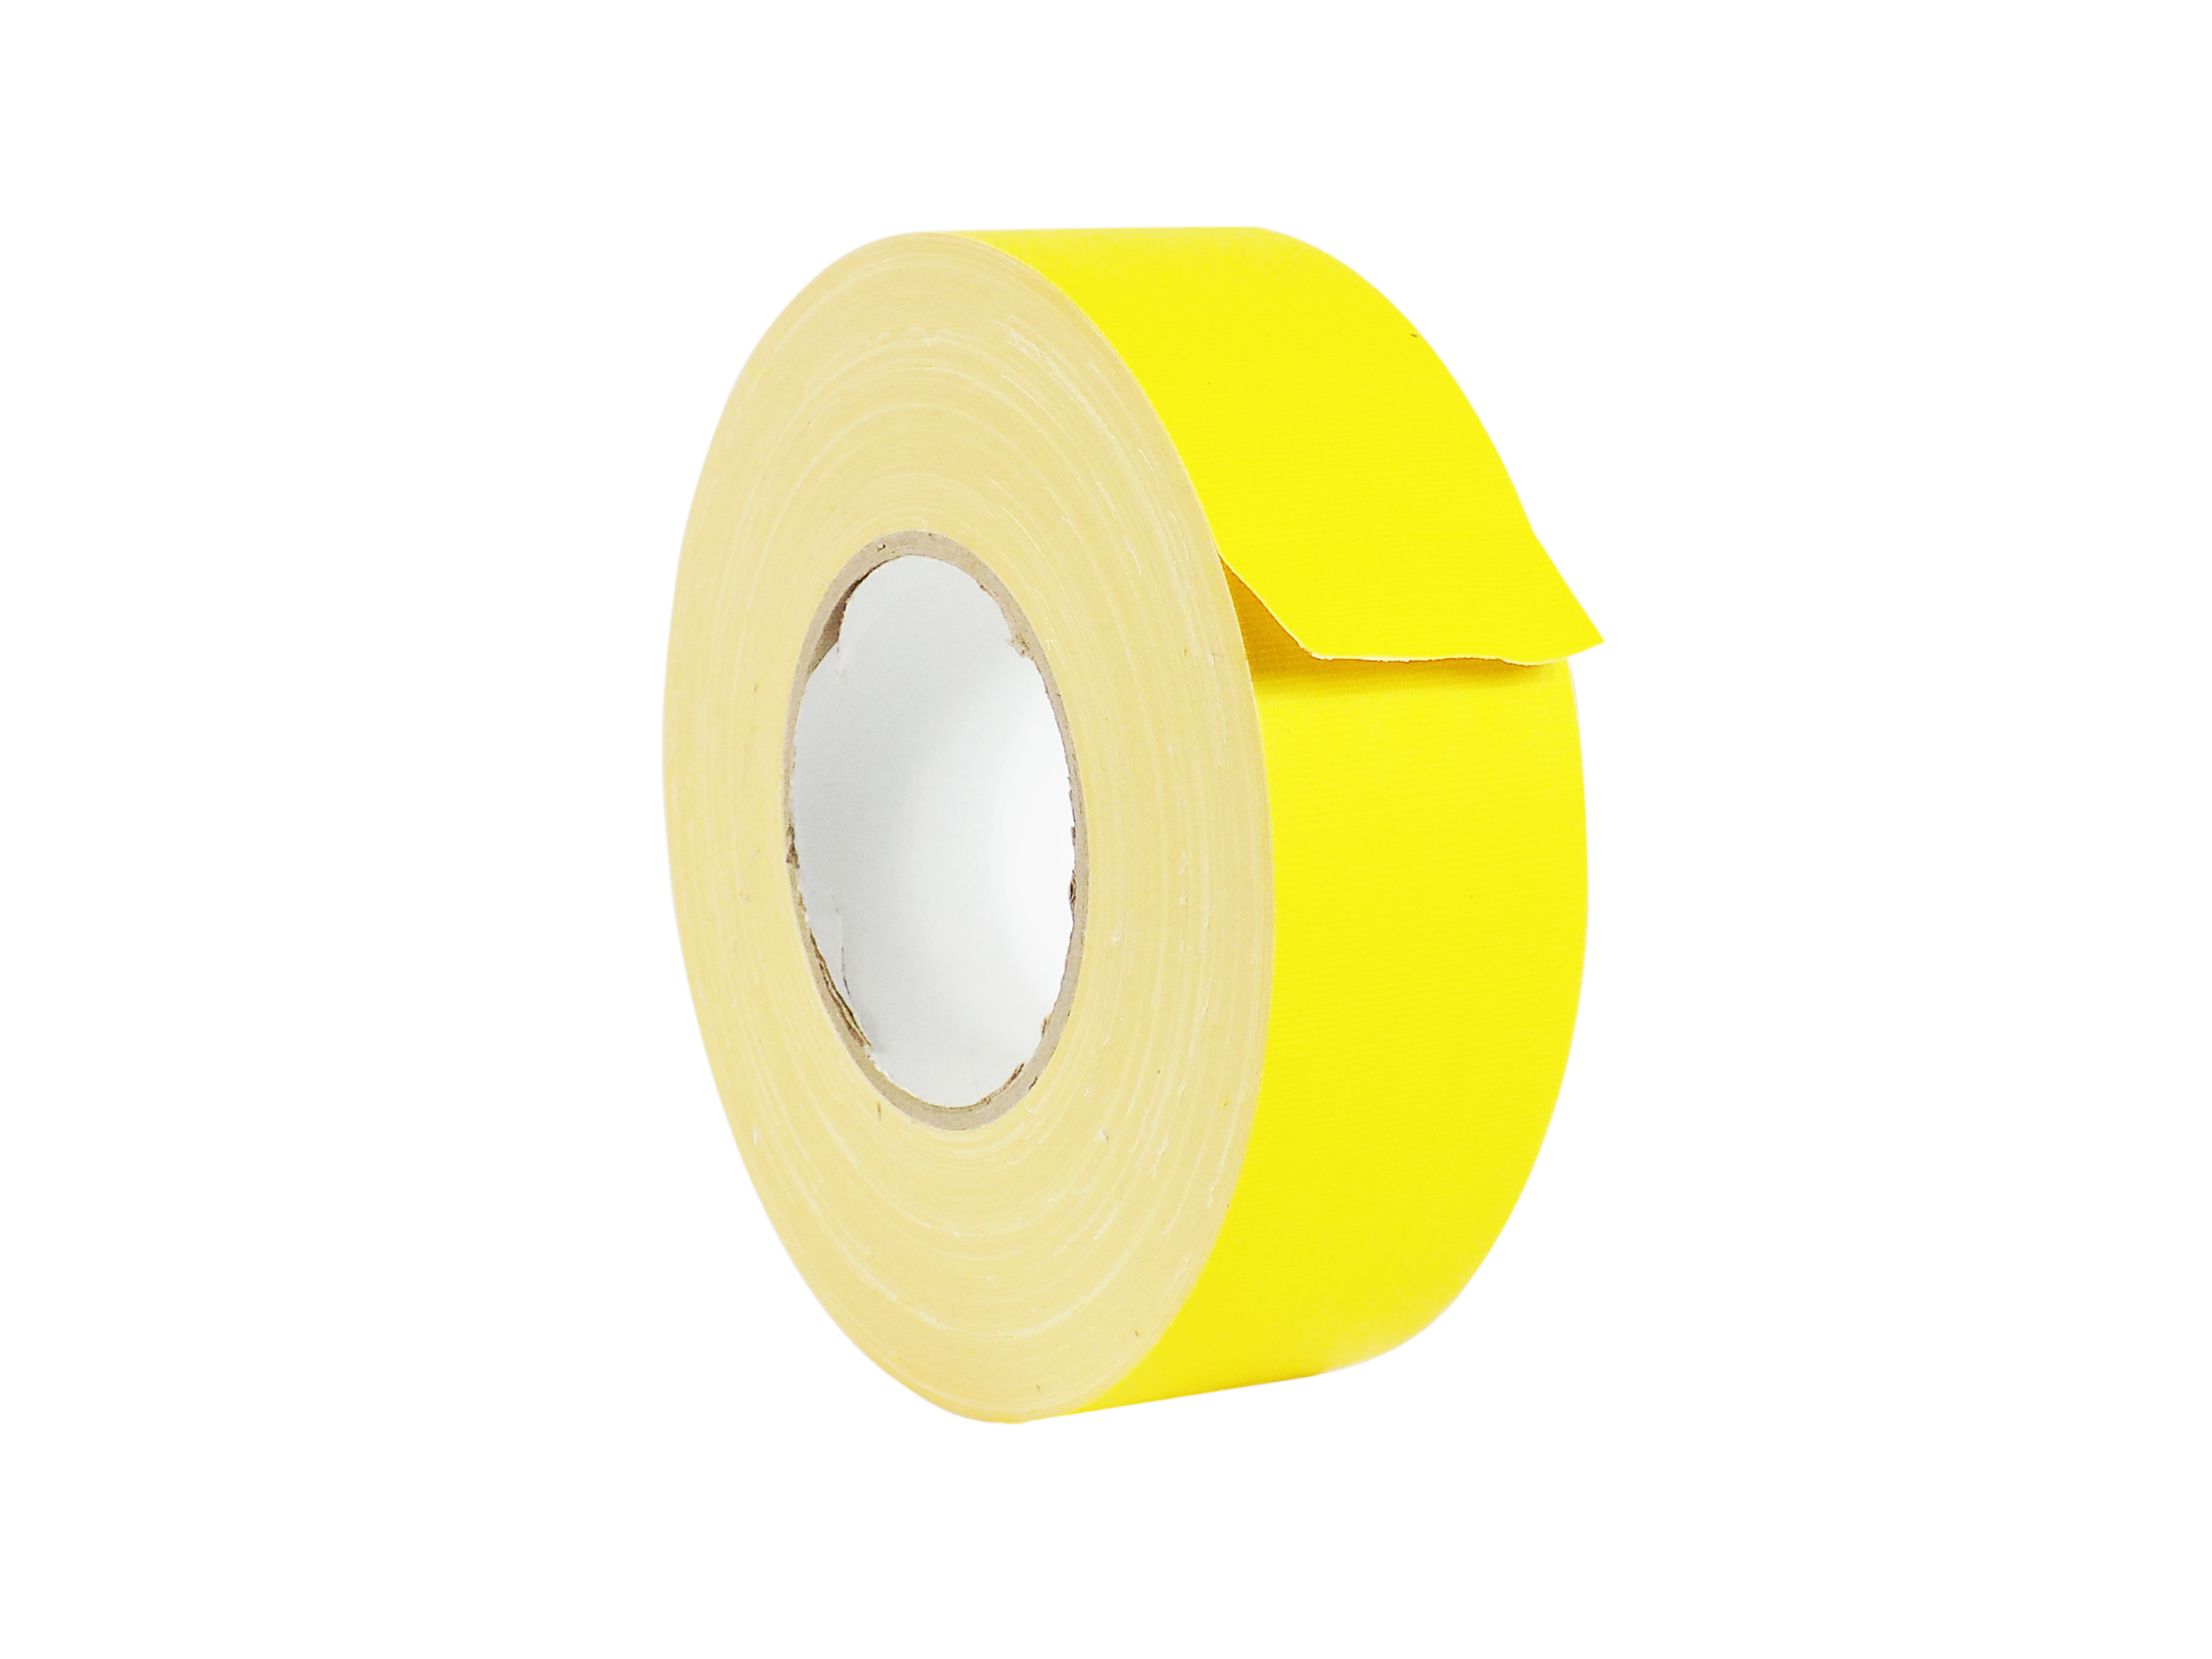 WOD Gaffer White Gaff Tape 1 inch x 60 yards LOW GLOSS FILM Strong No Residue 